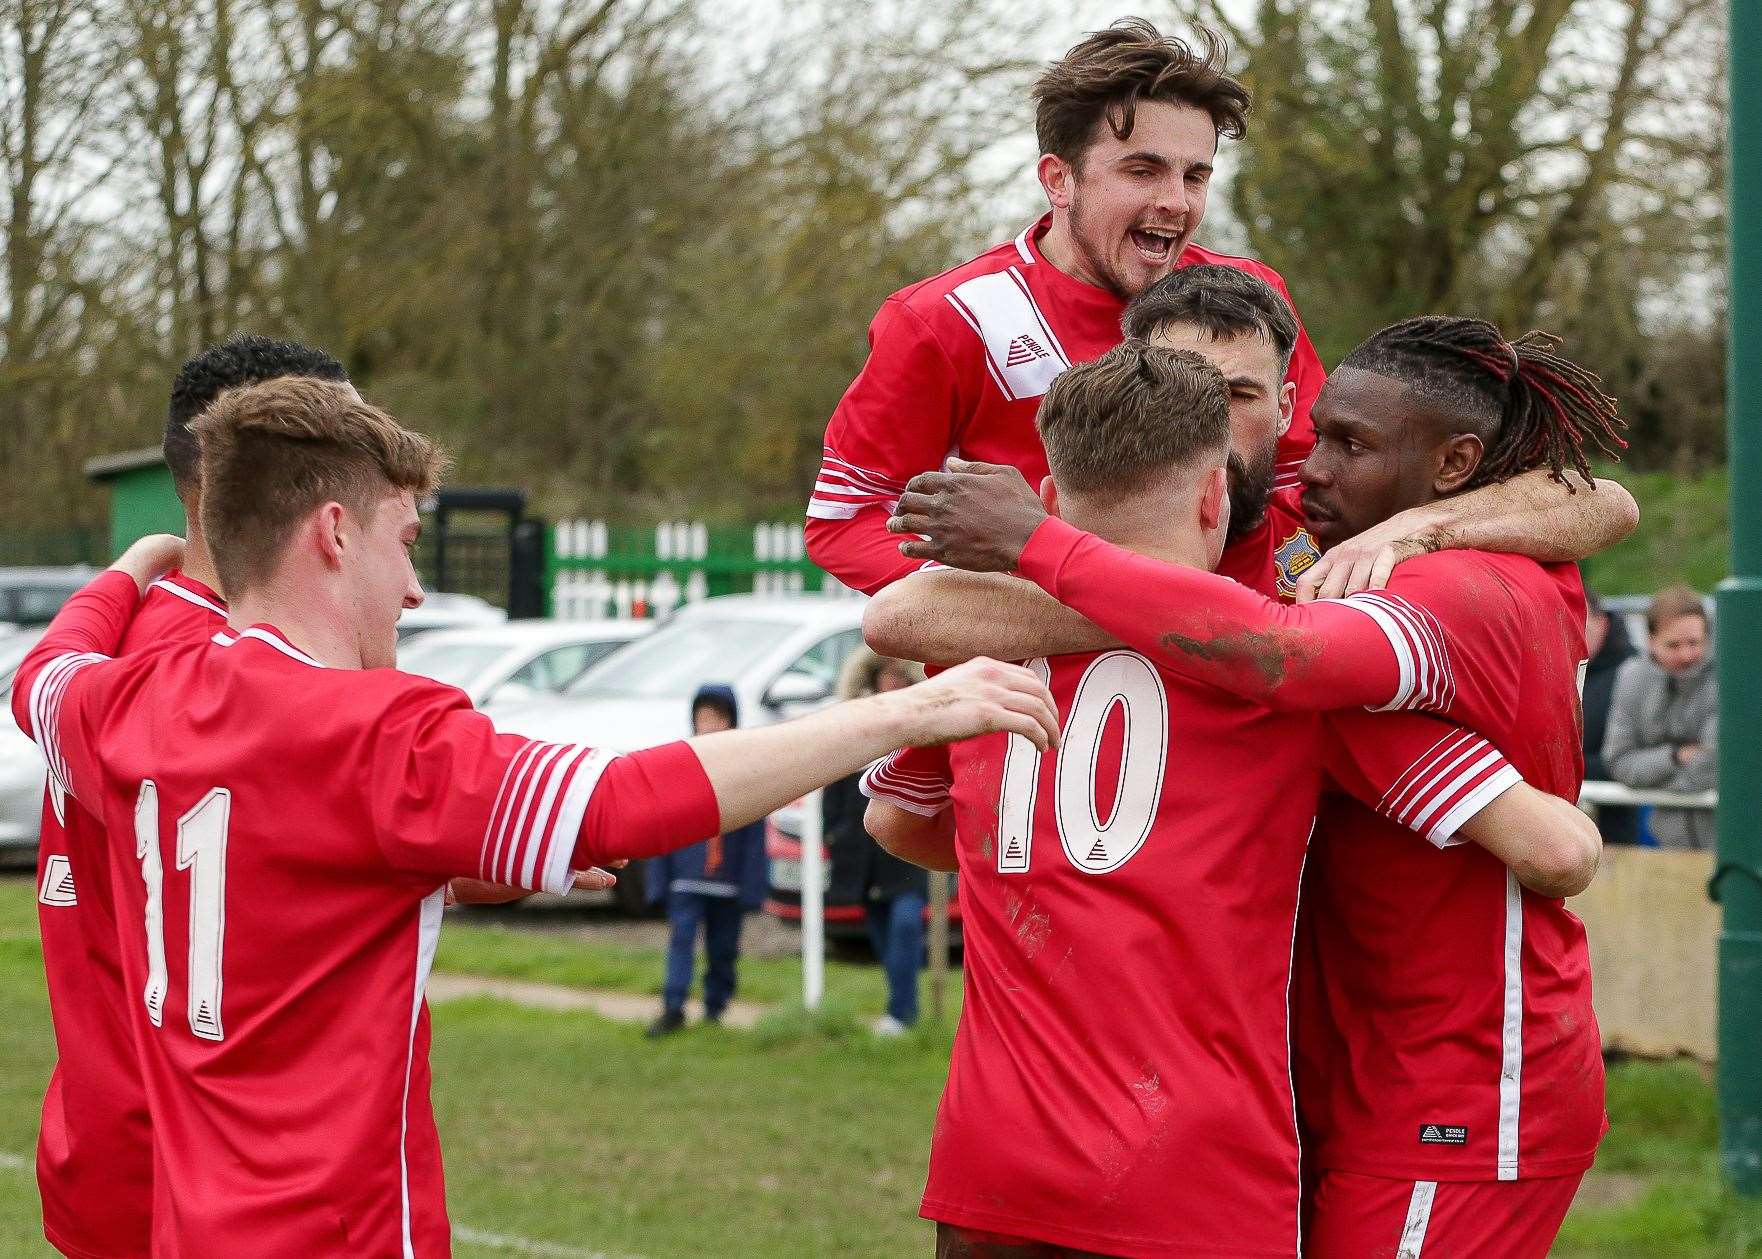 Jefferson Aibangbee celebrates his goal with his team-mates in their weekend 2-1 victory at Sutton Athletic. Picture: Les Biggs